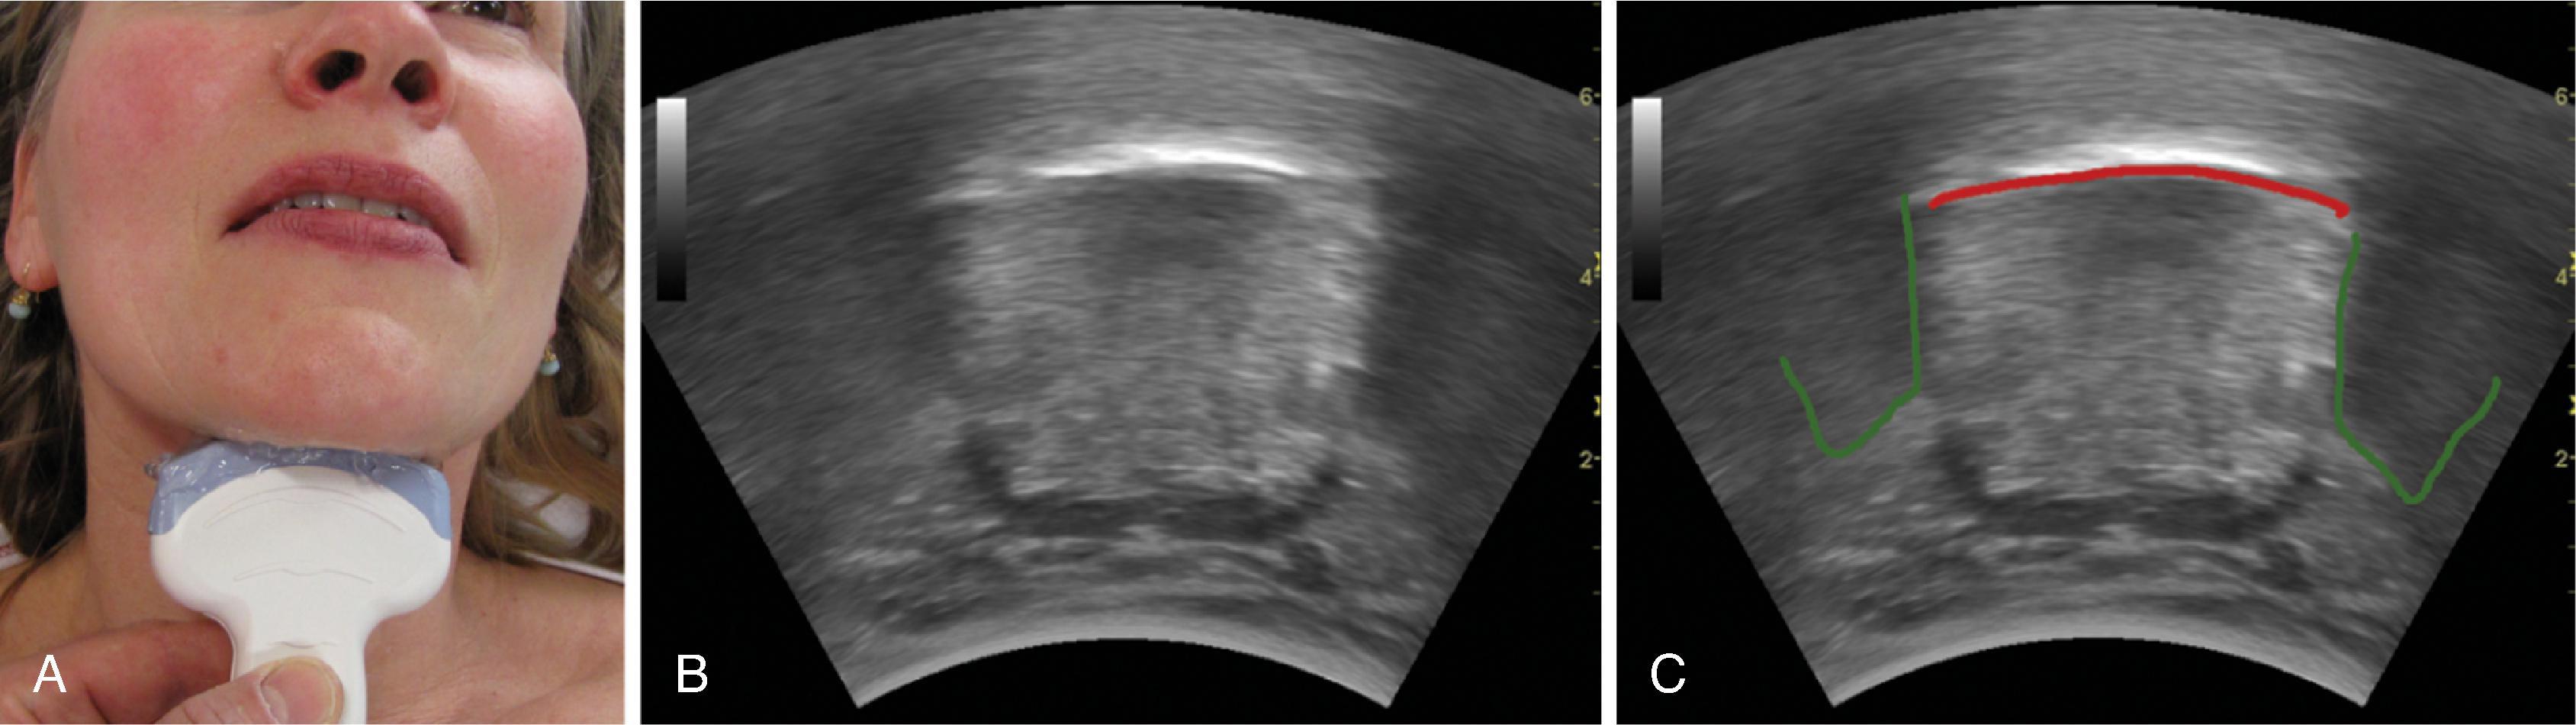 Fig. 3.2, Transverse scan of the floor of the mouth and the tongue. (A) Placement of the transducer. (B) The scanning image. (C) The dorsal surface of the tongue is indicated by a red line , and shadows arising from the mandible are outlined in green .